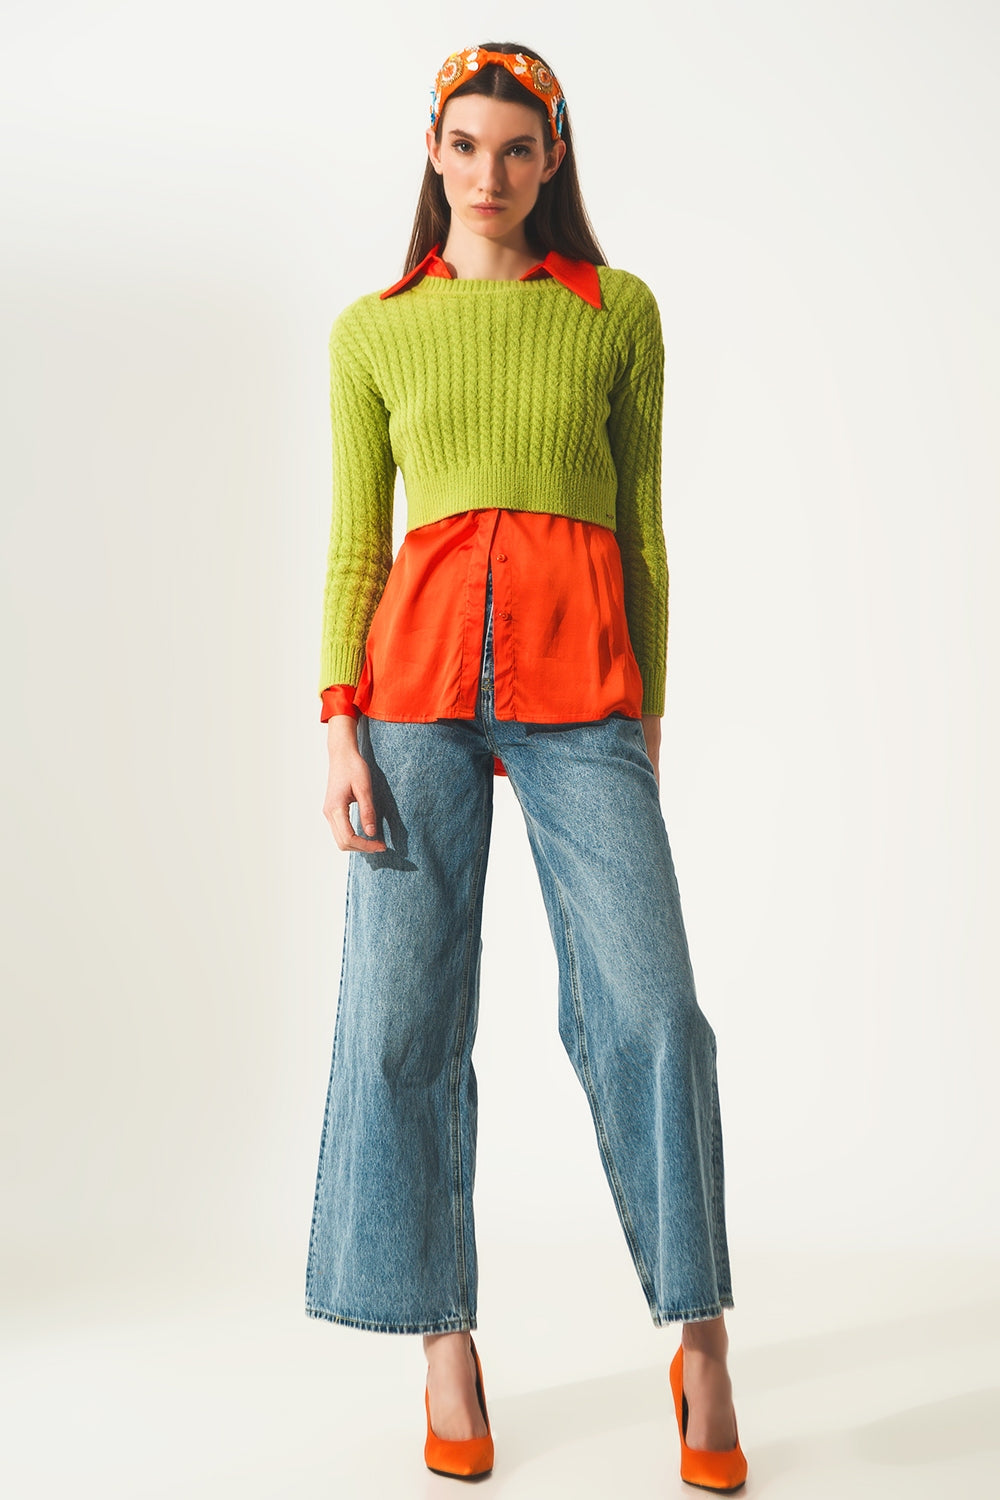 TEEK - Lime Green Round Neck Cable Knit Crop Sweater SWEATER TEEK M   